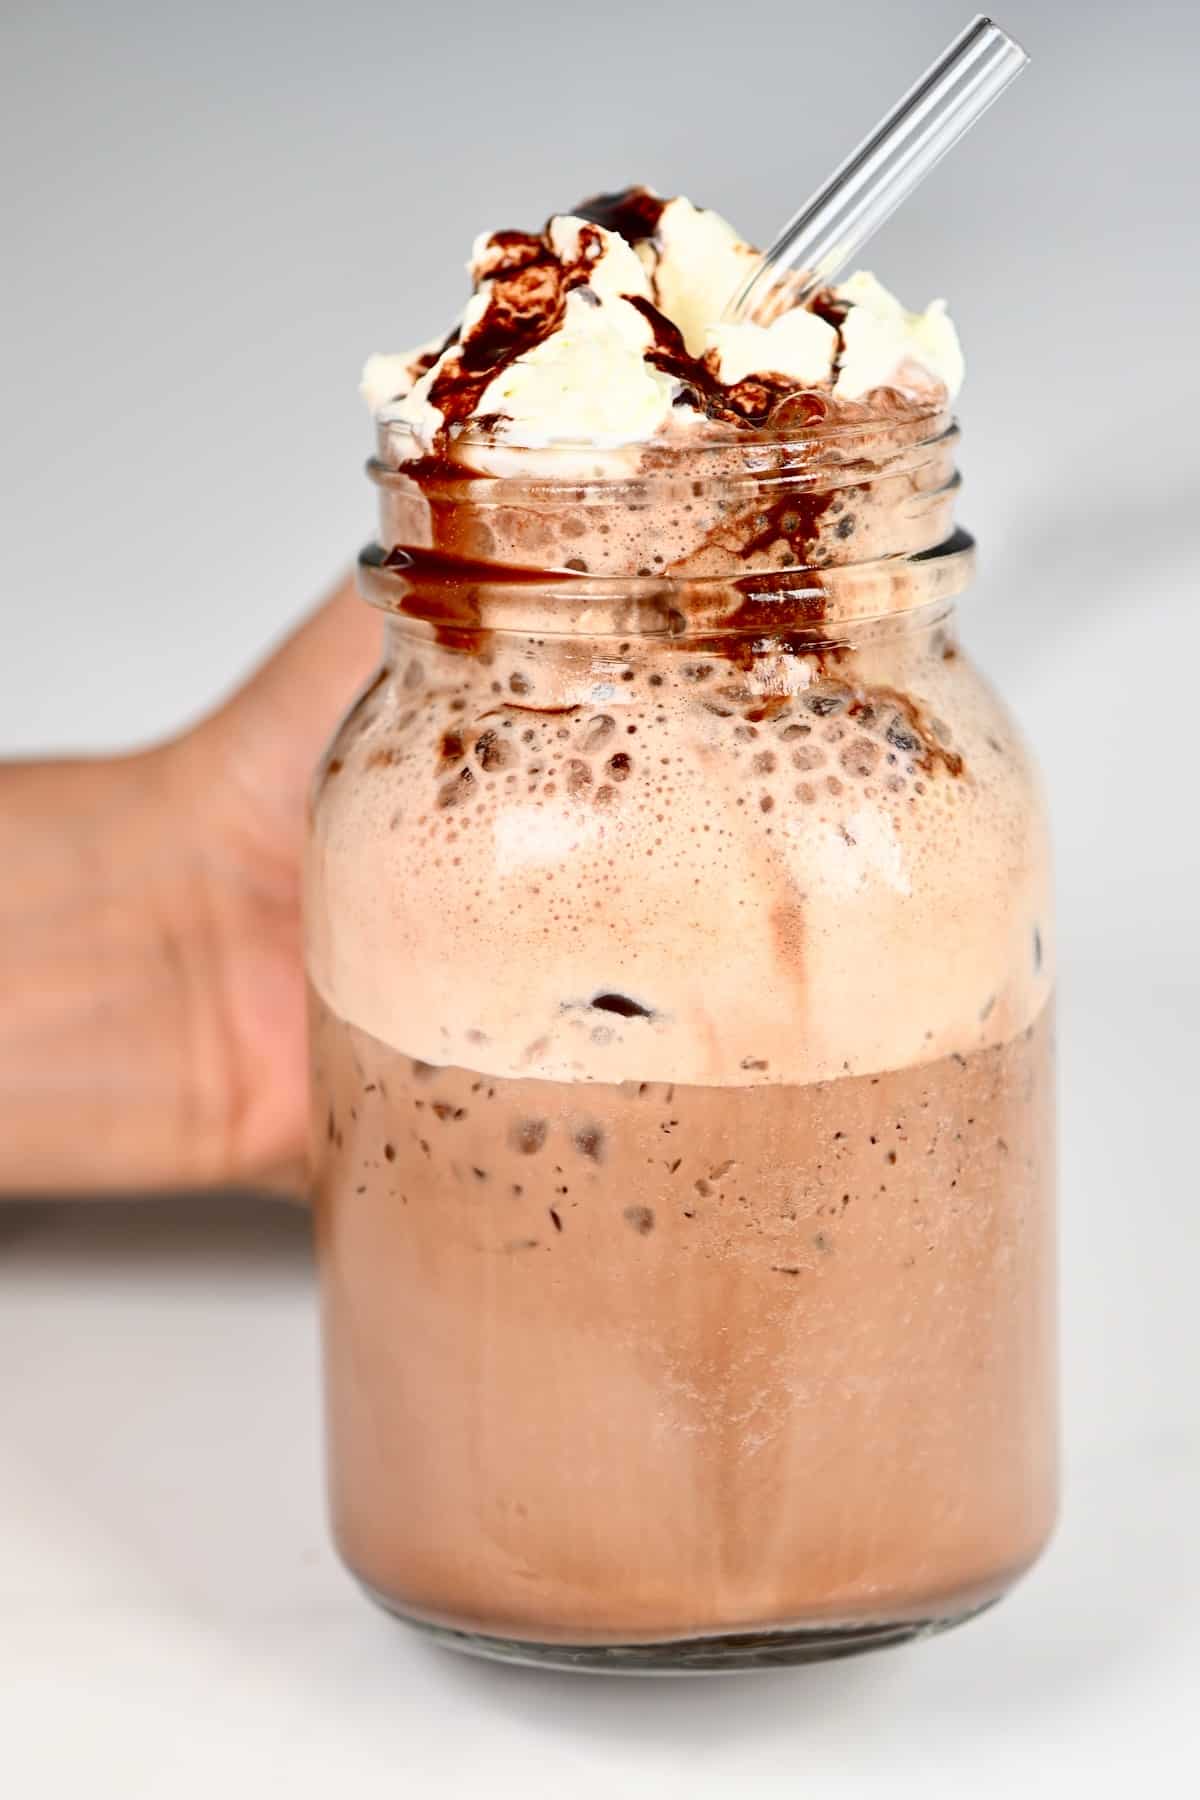 Mocha Frappuccino topped with whipped cream and chocolate syrup